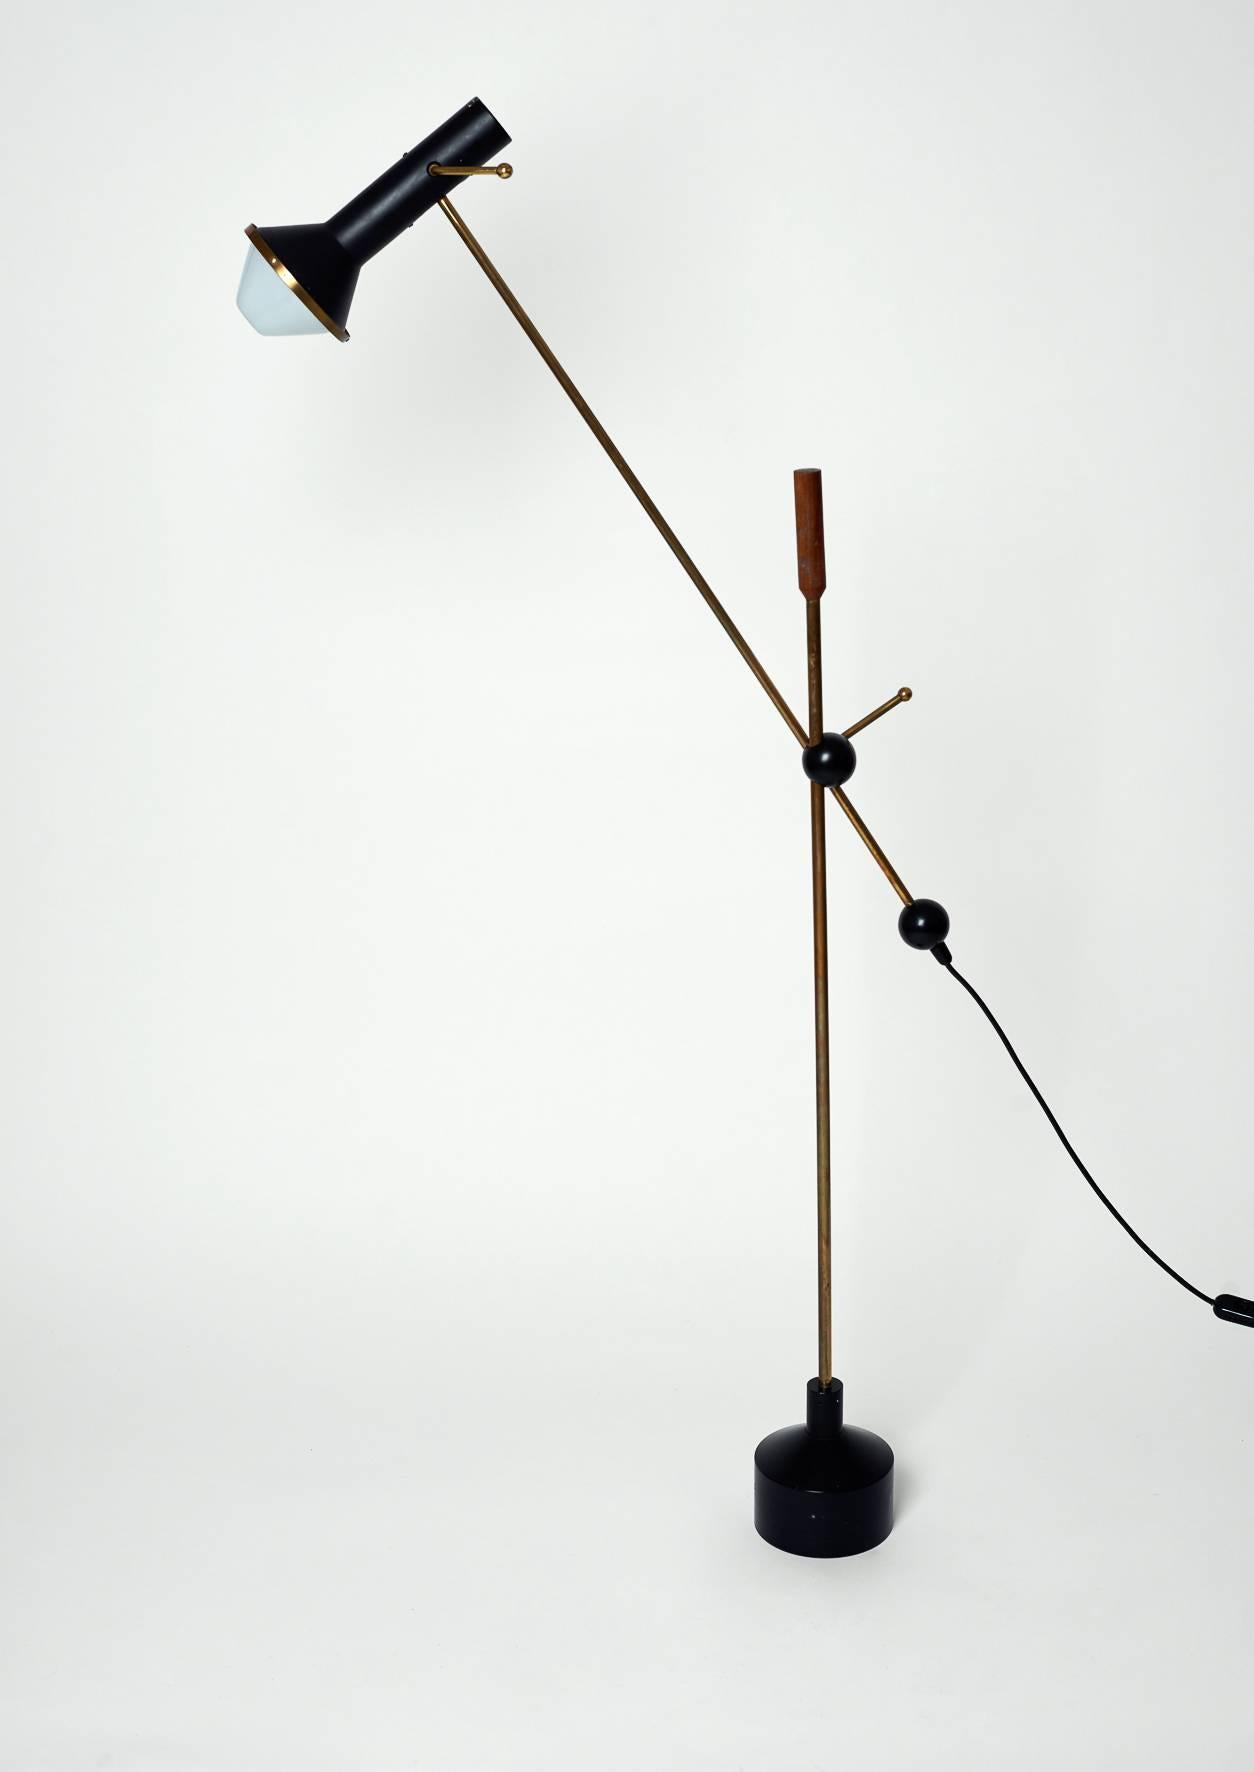 Tapio Wirkkala for Idman-OY, Finland, 1960.
A rare K10-47 floor lamp, heavy cast iron base supporting brass upright with teak handle. The ball joint junction to the lamp arm allows articulation in all directions.
The painted metal shade also